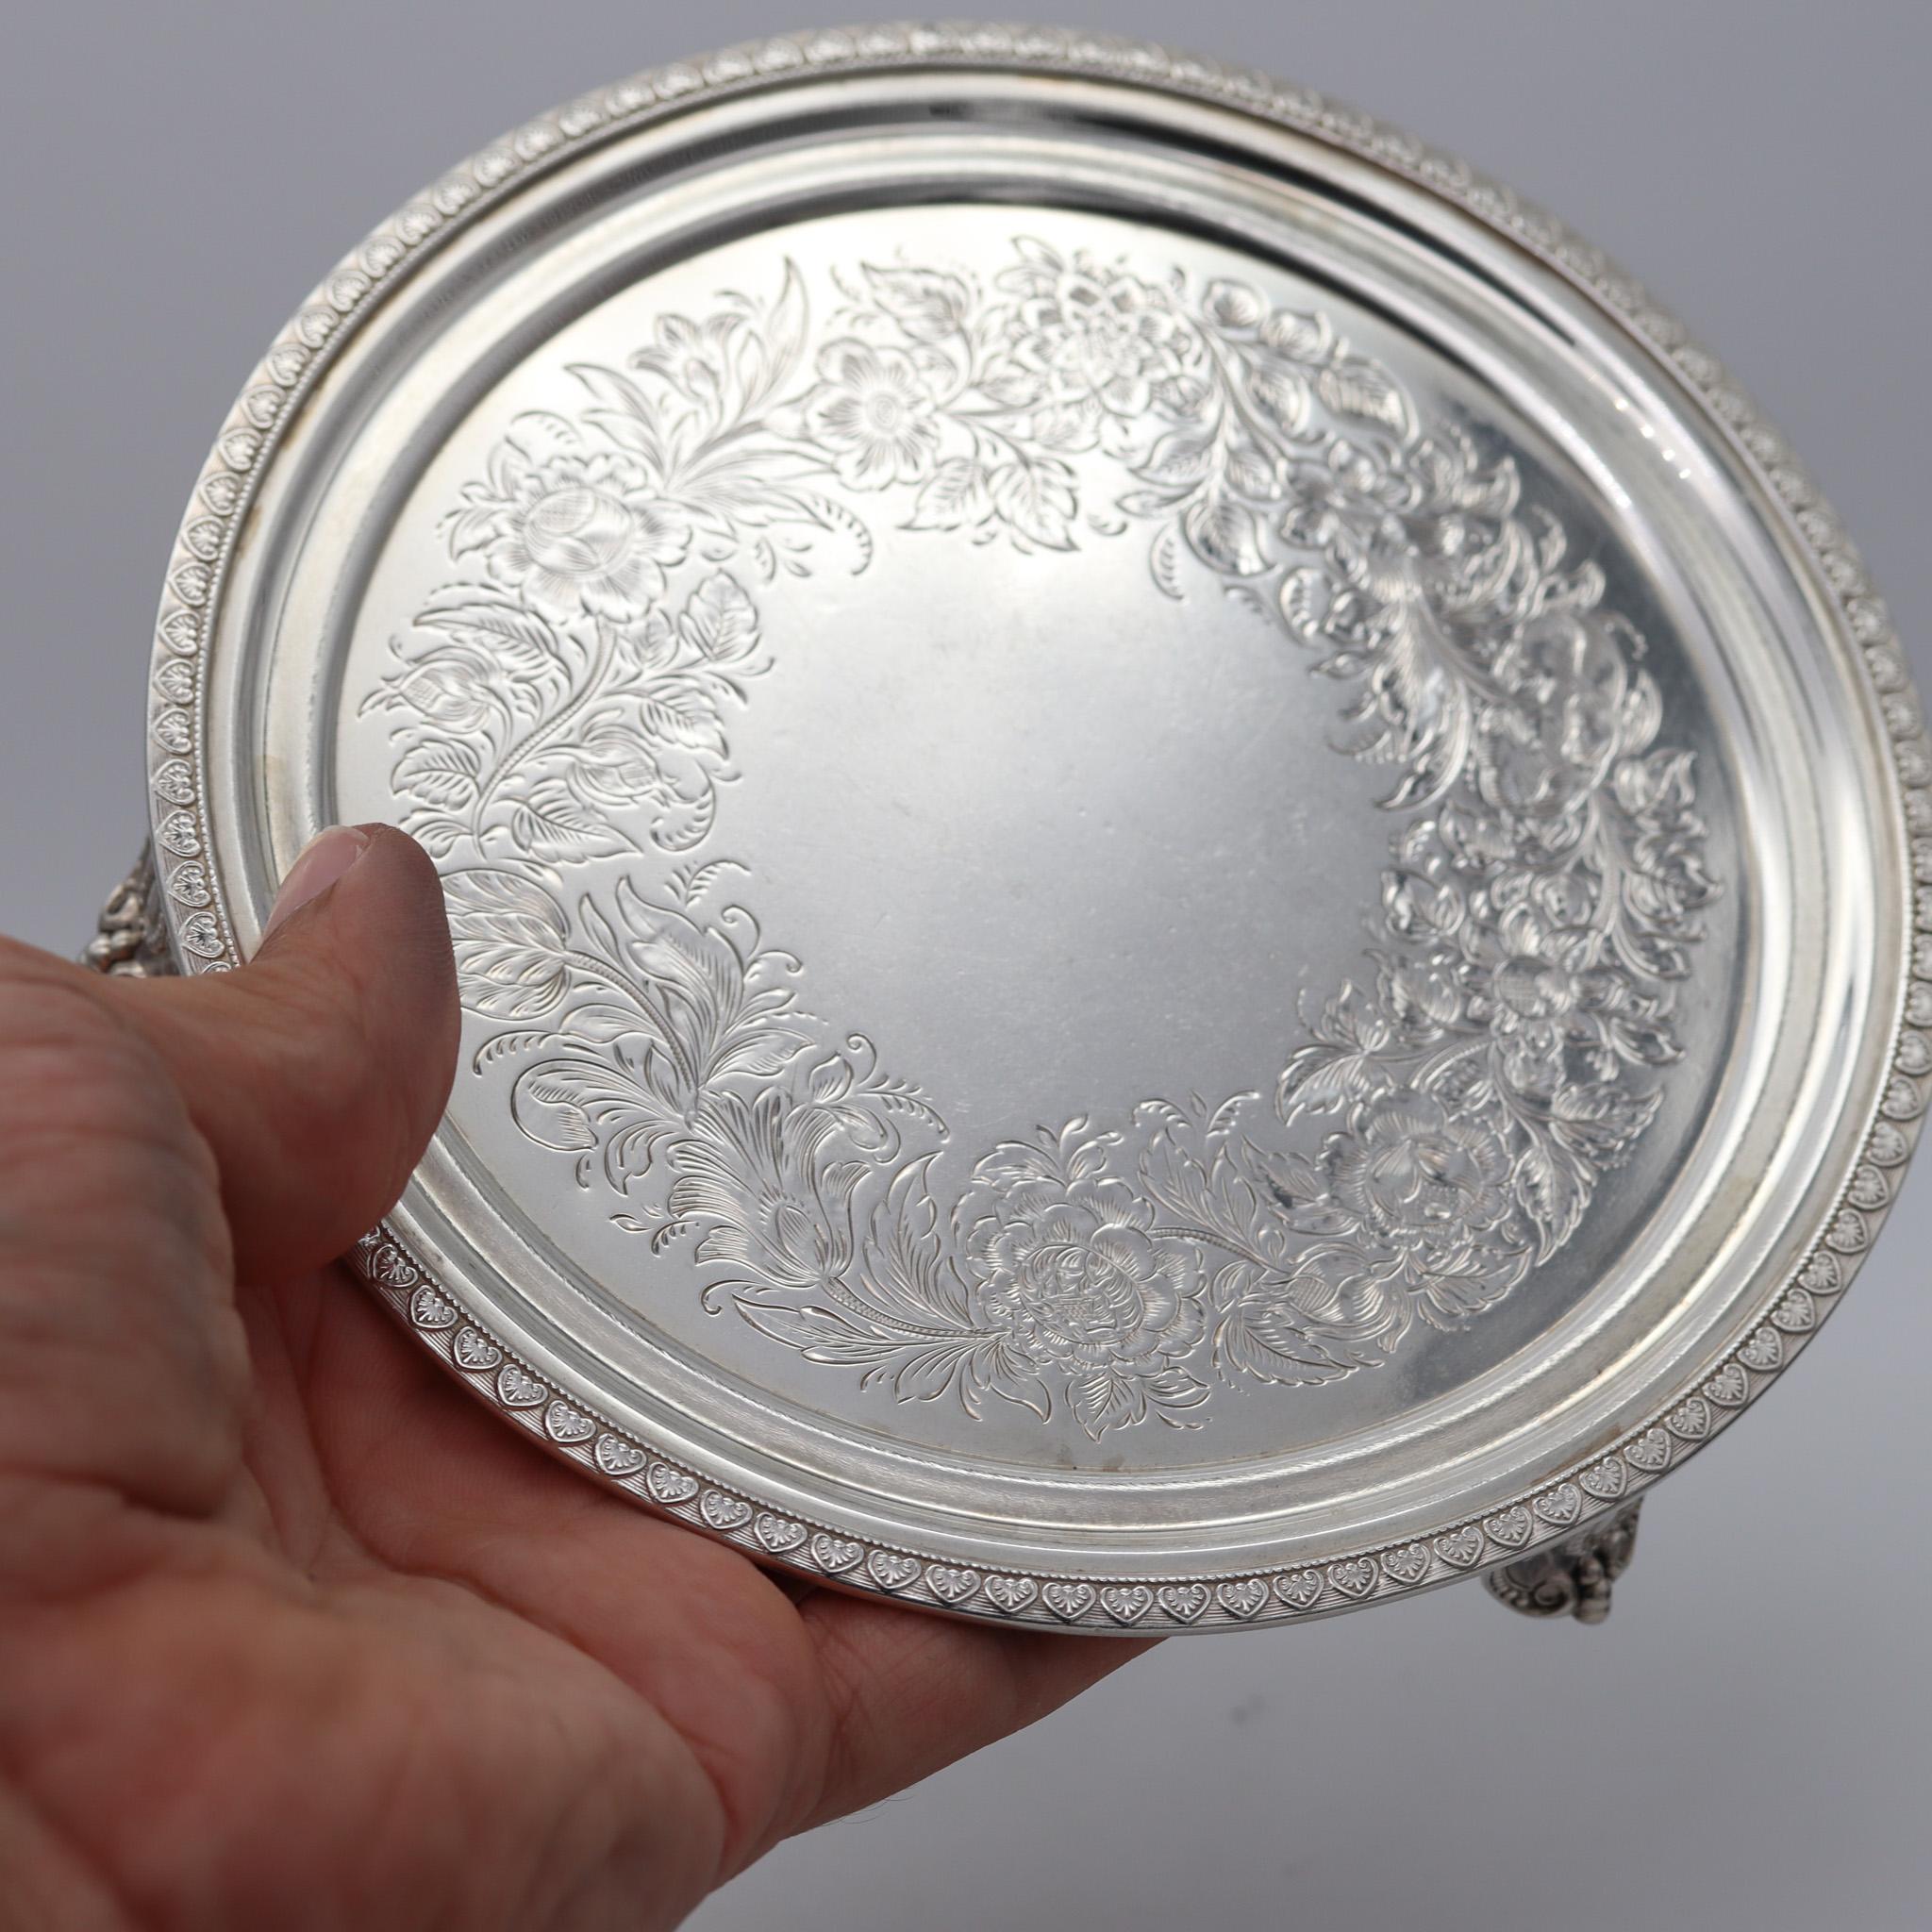 Tiffany & Co. 1858 New York Round Display Tray In Solid .925 Sterling Silver In Excellent Condition For Sale In Miami, FL